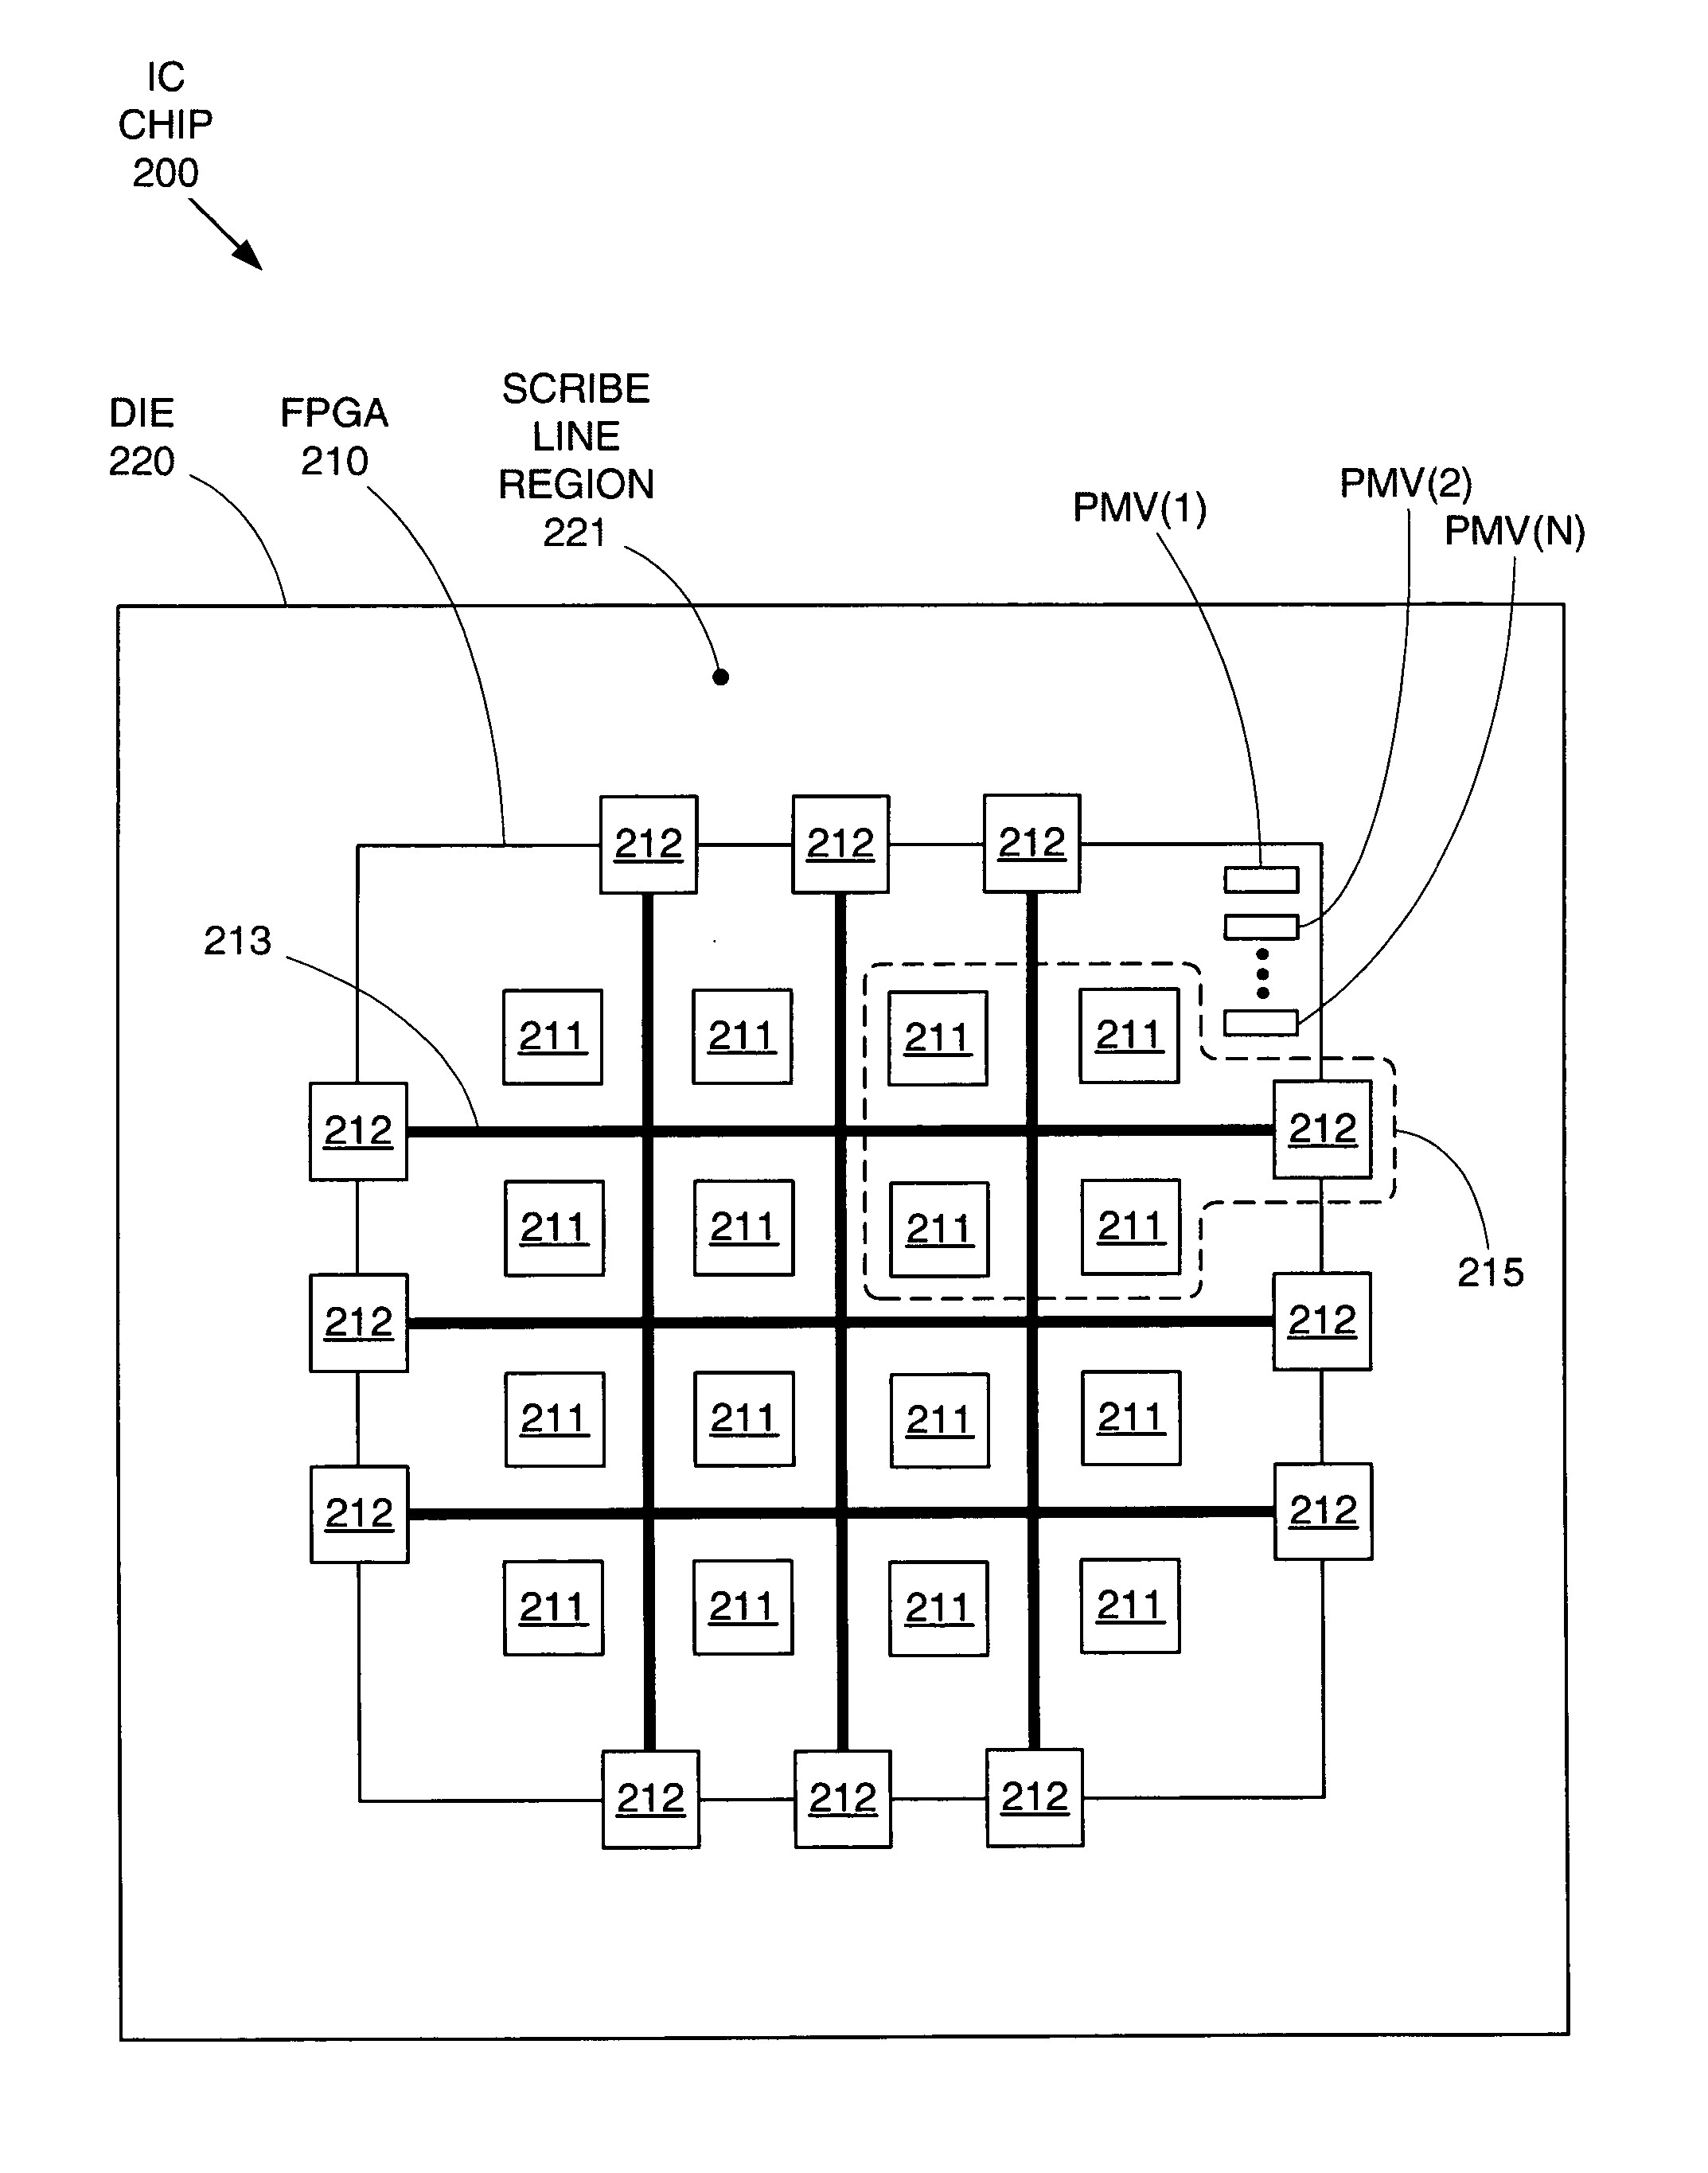 Characterizing circuit performance by separating device and interconnect impact on signal delay